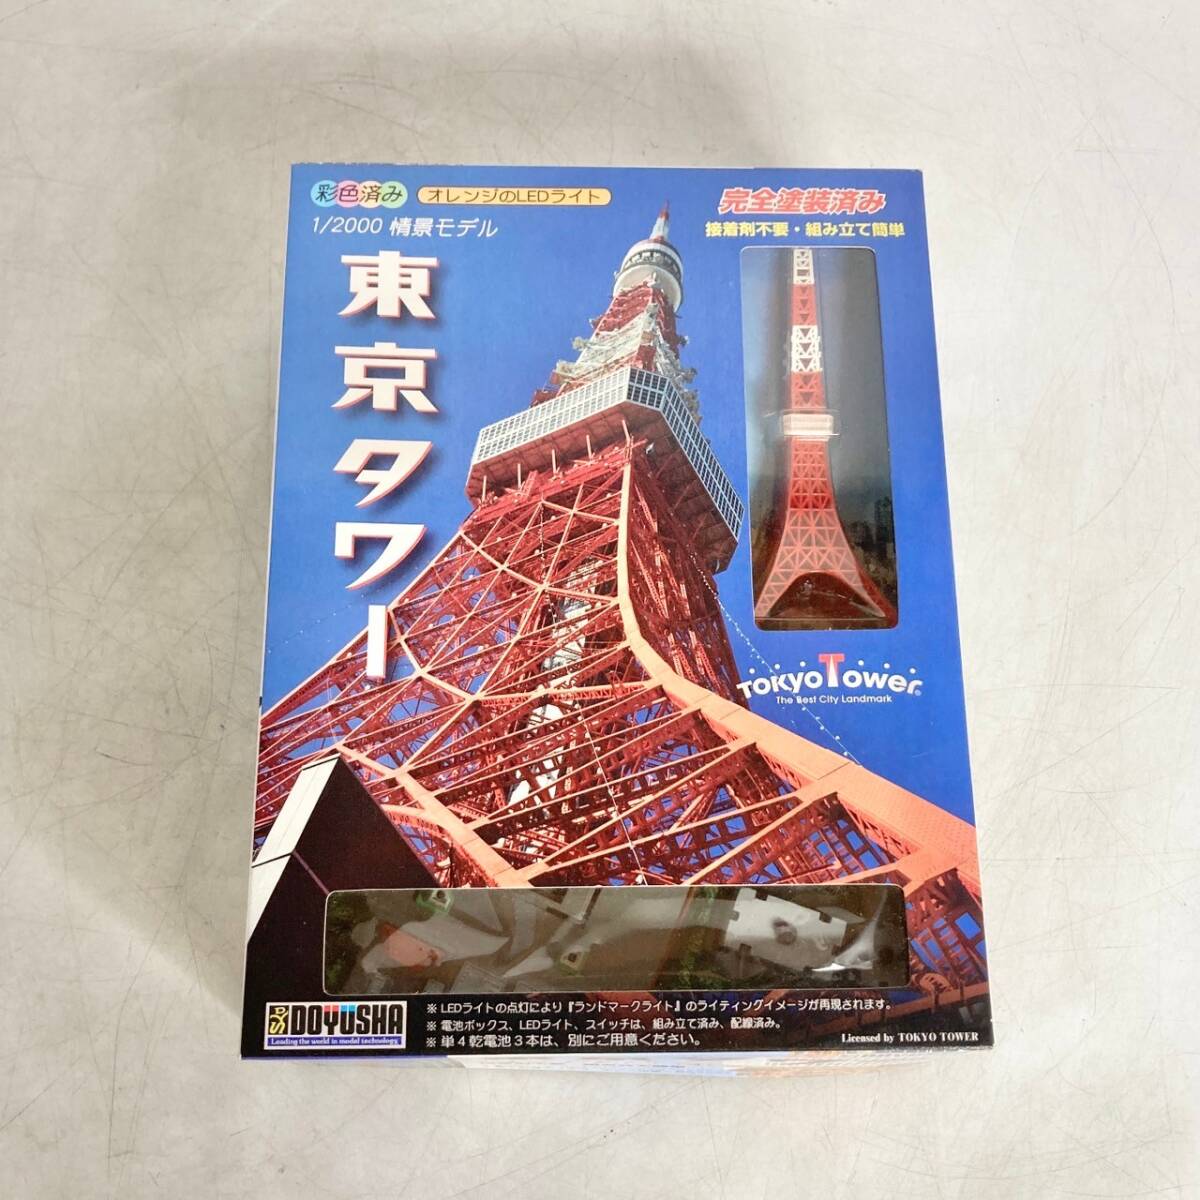  not yet constructed present condition goods plastic model .. company DOYUUSHA Tokyo tower 1/2000.. model orange LED light coloring ending building 